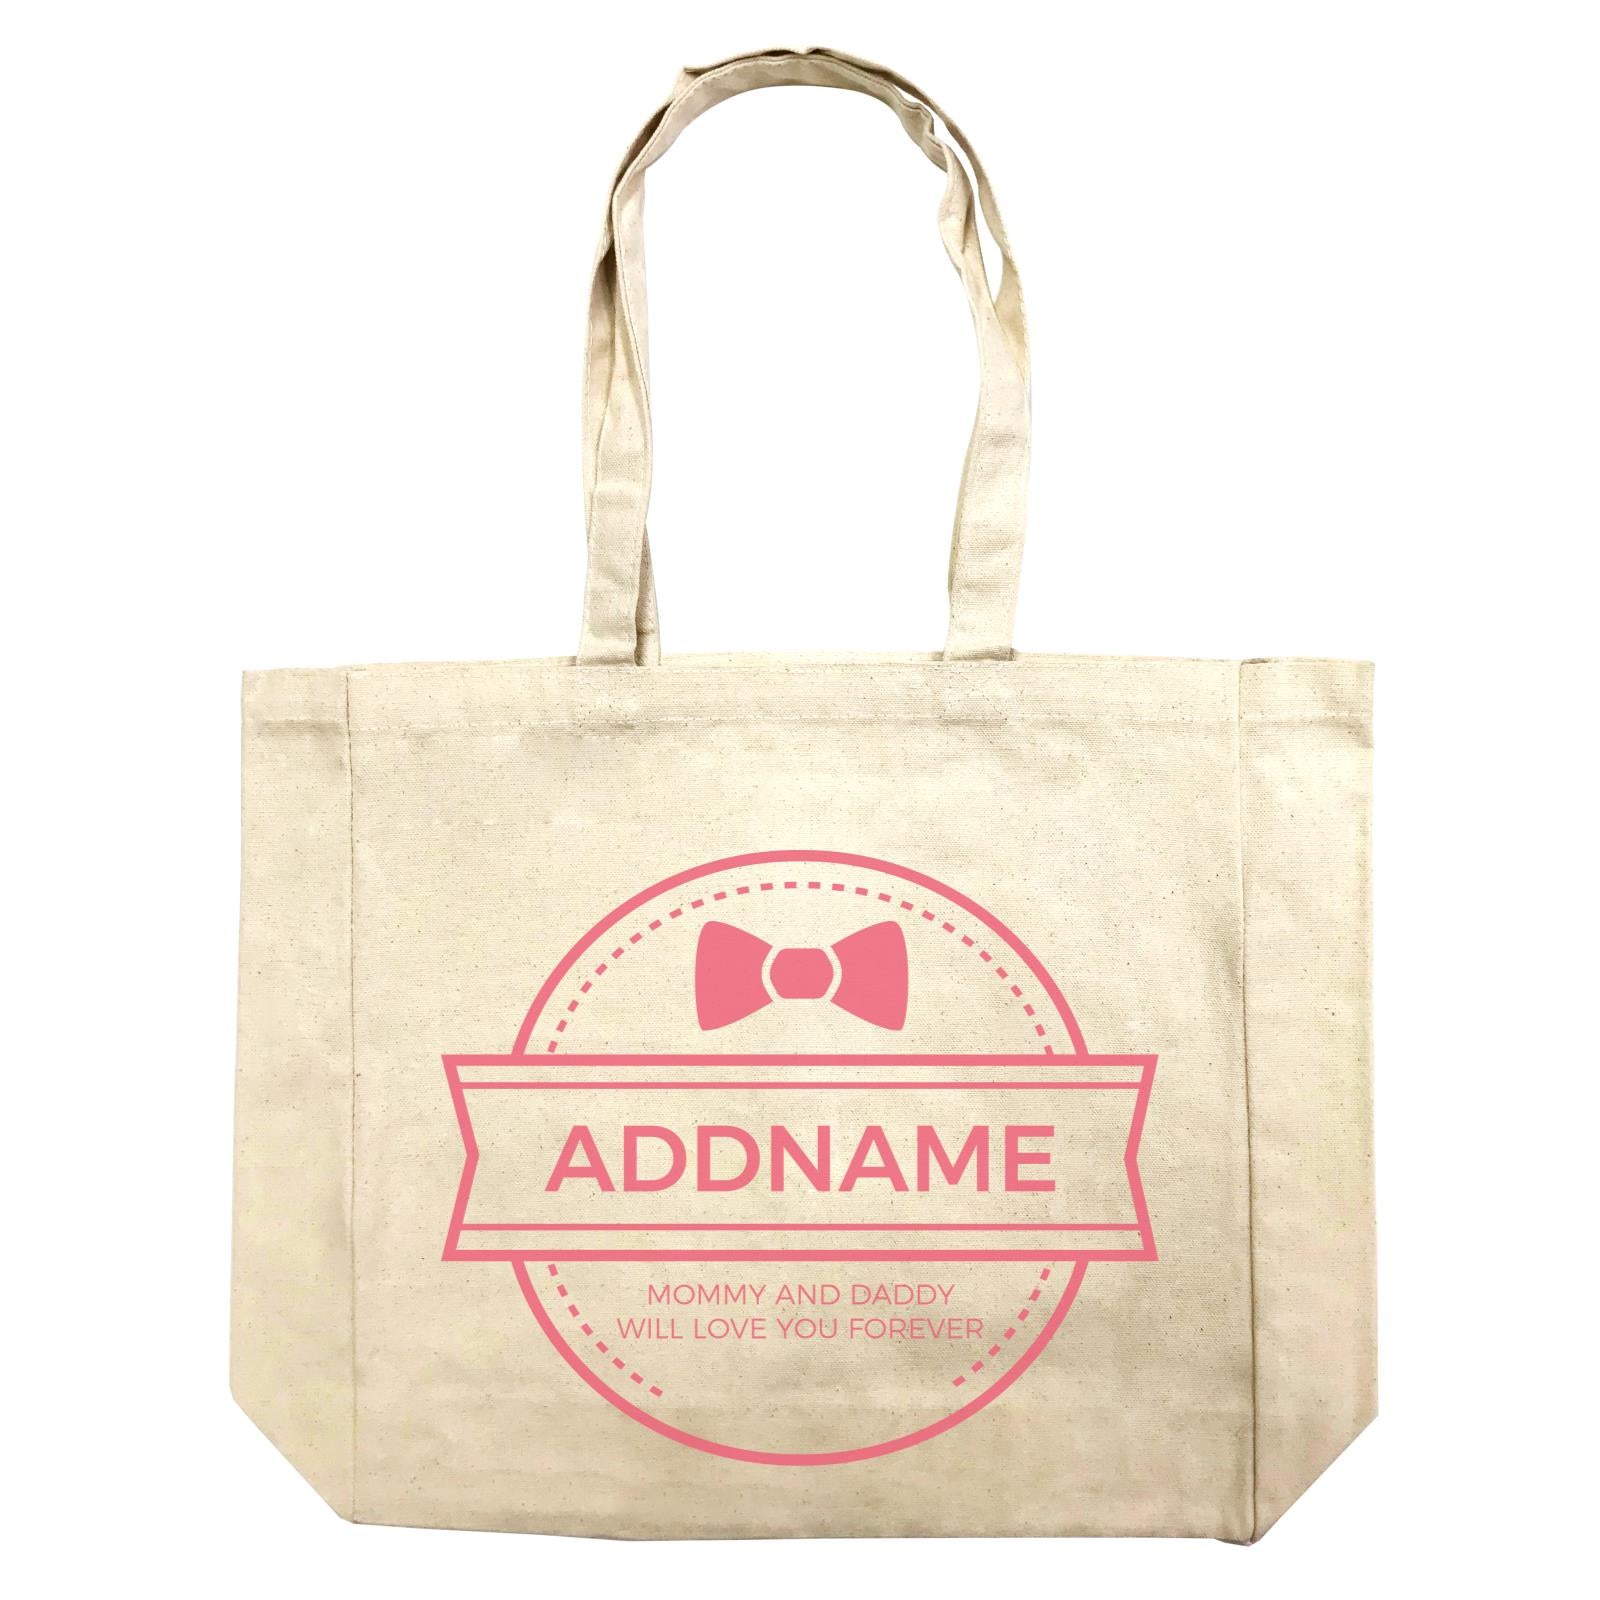 Ribbon Emblem Personalizable with Name and Text Shopping Bag